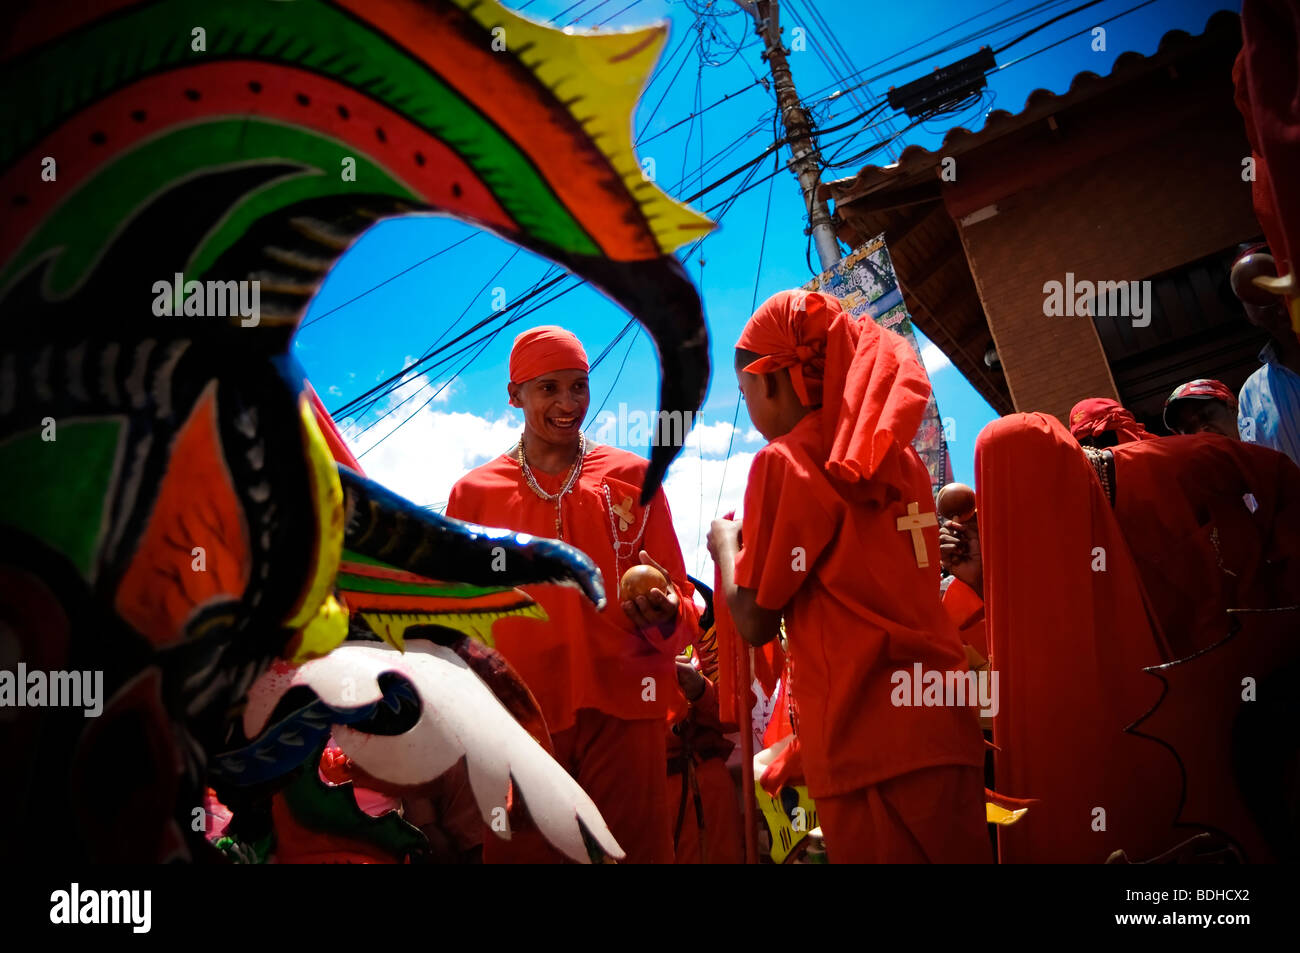 Young men dressed in red costumes celebrate a festival Stock Photo